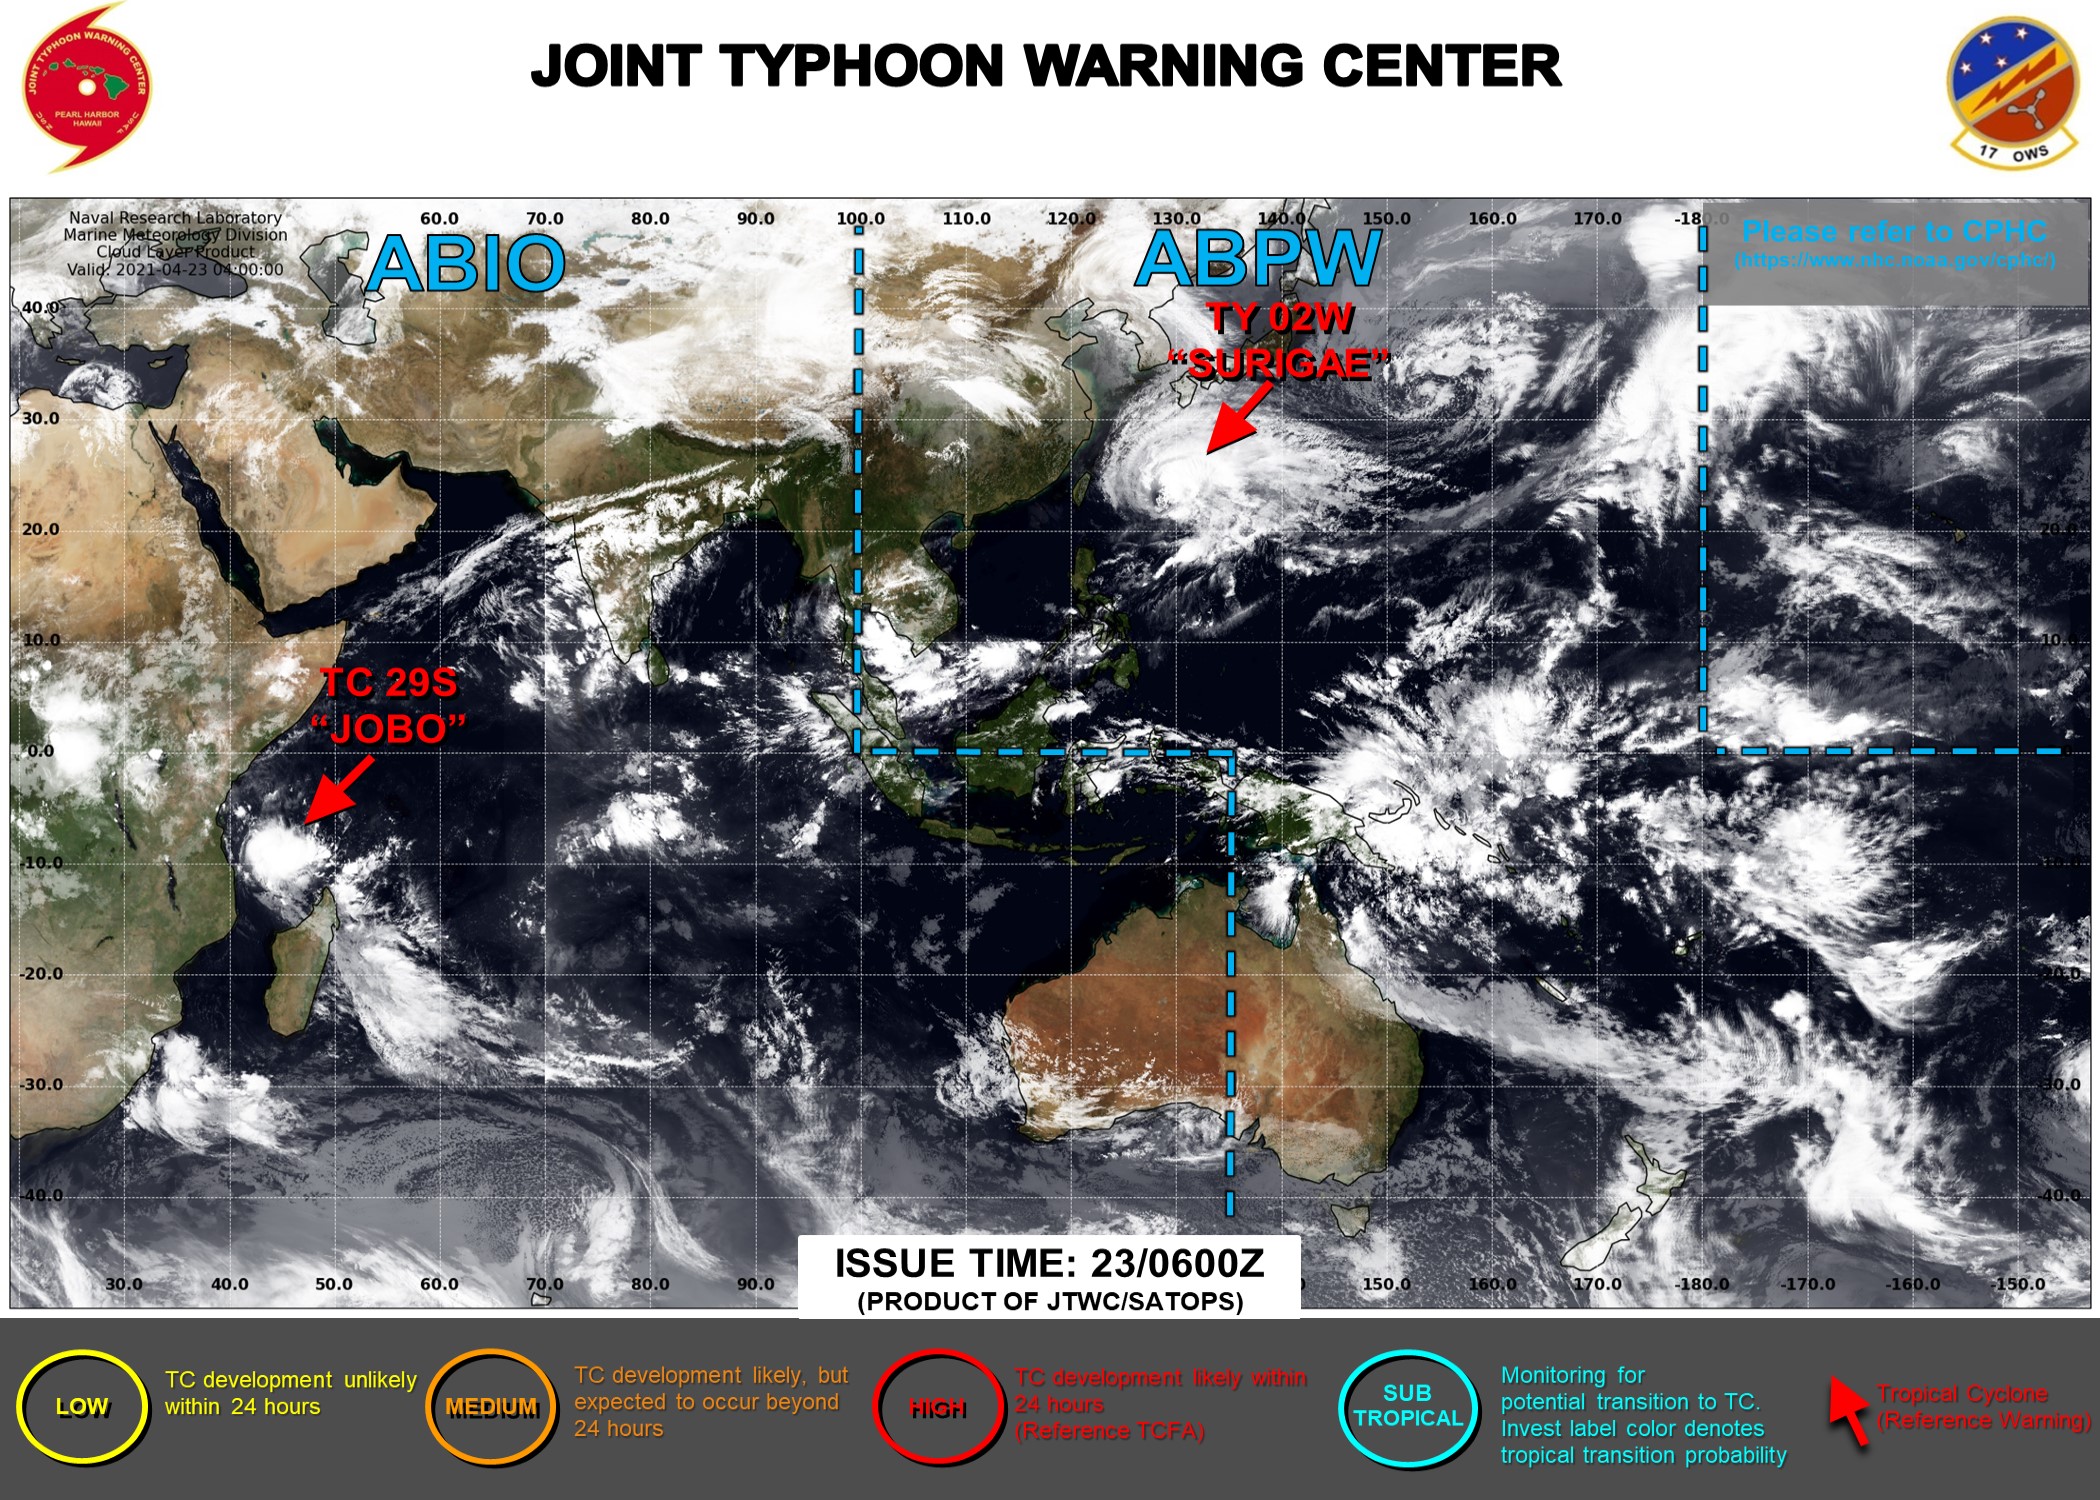 23/06UTC. THE JTWC IS ISSUING 6HOURLY WARNINGS ON 02W(SURIGAE AND 12HOURLY WARNINGS ON 29S(JOBO). 3HOURLY SATELLITE BULLETINS ARE ISSUED FOR BOTH SYSTEMS.